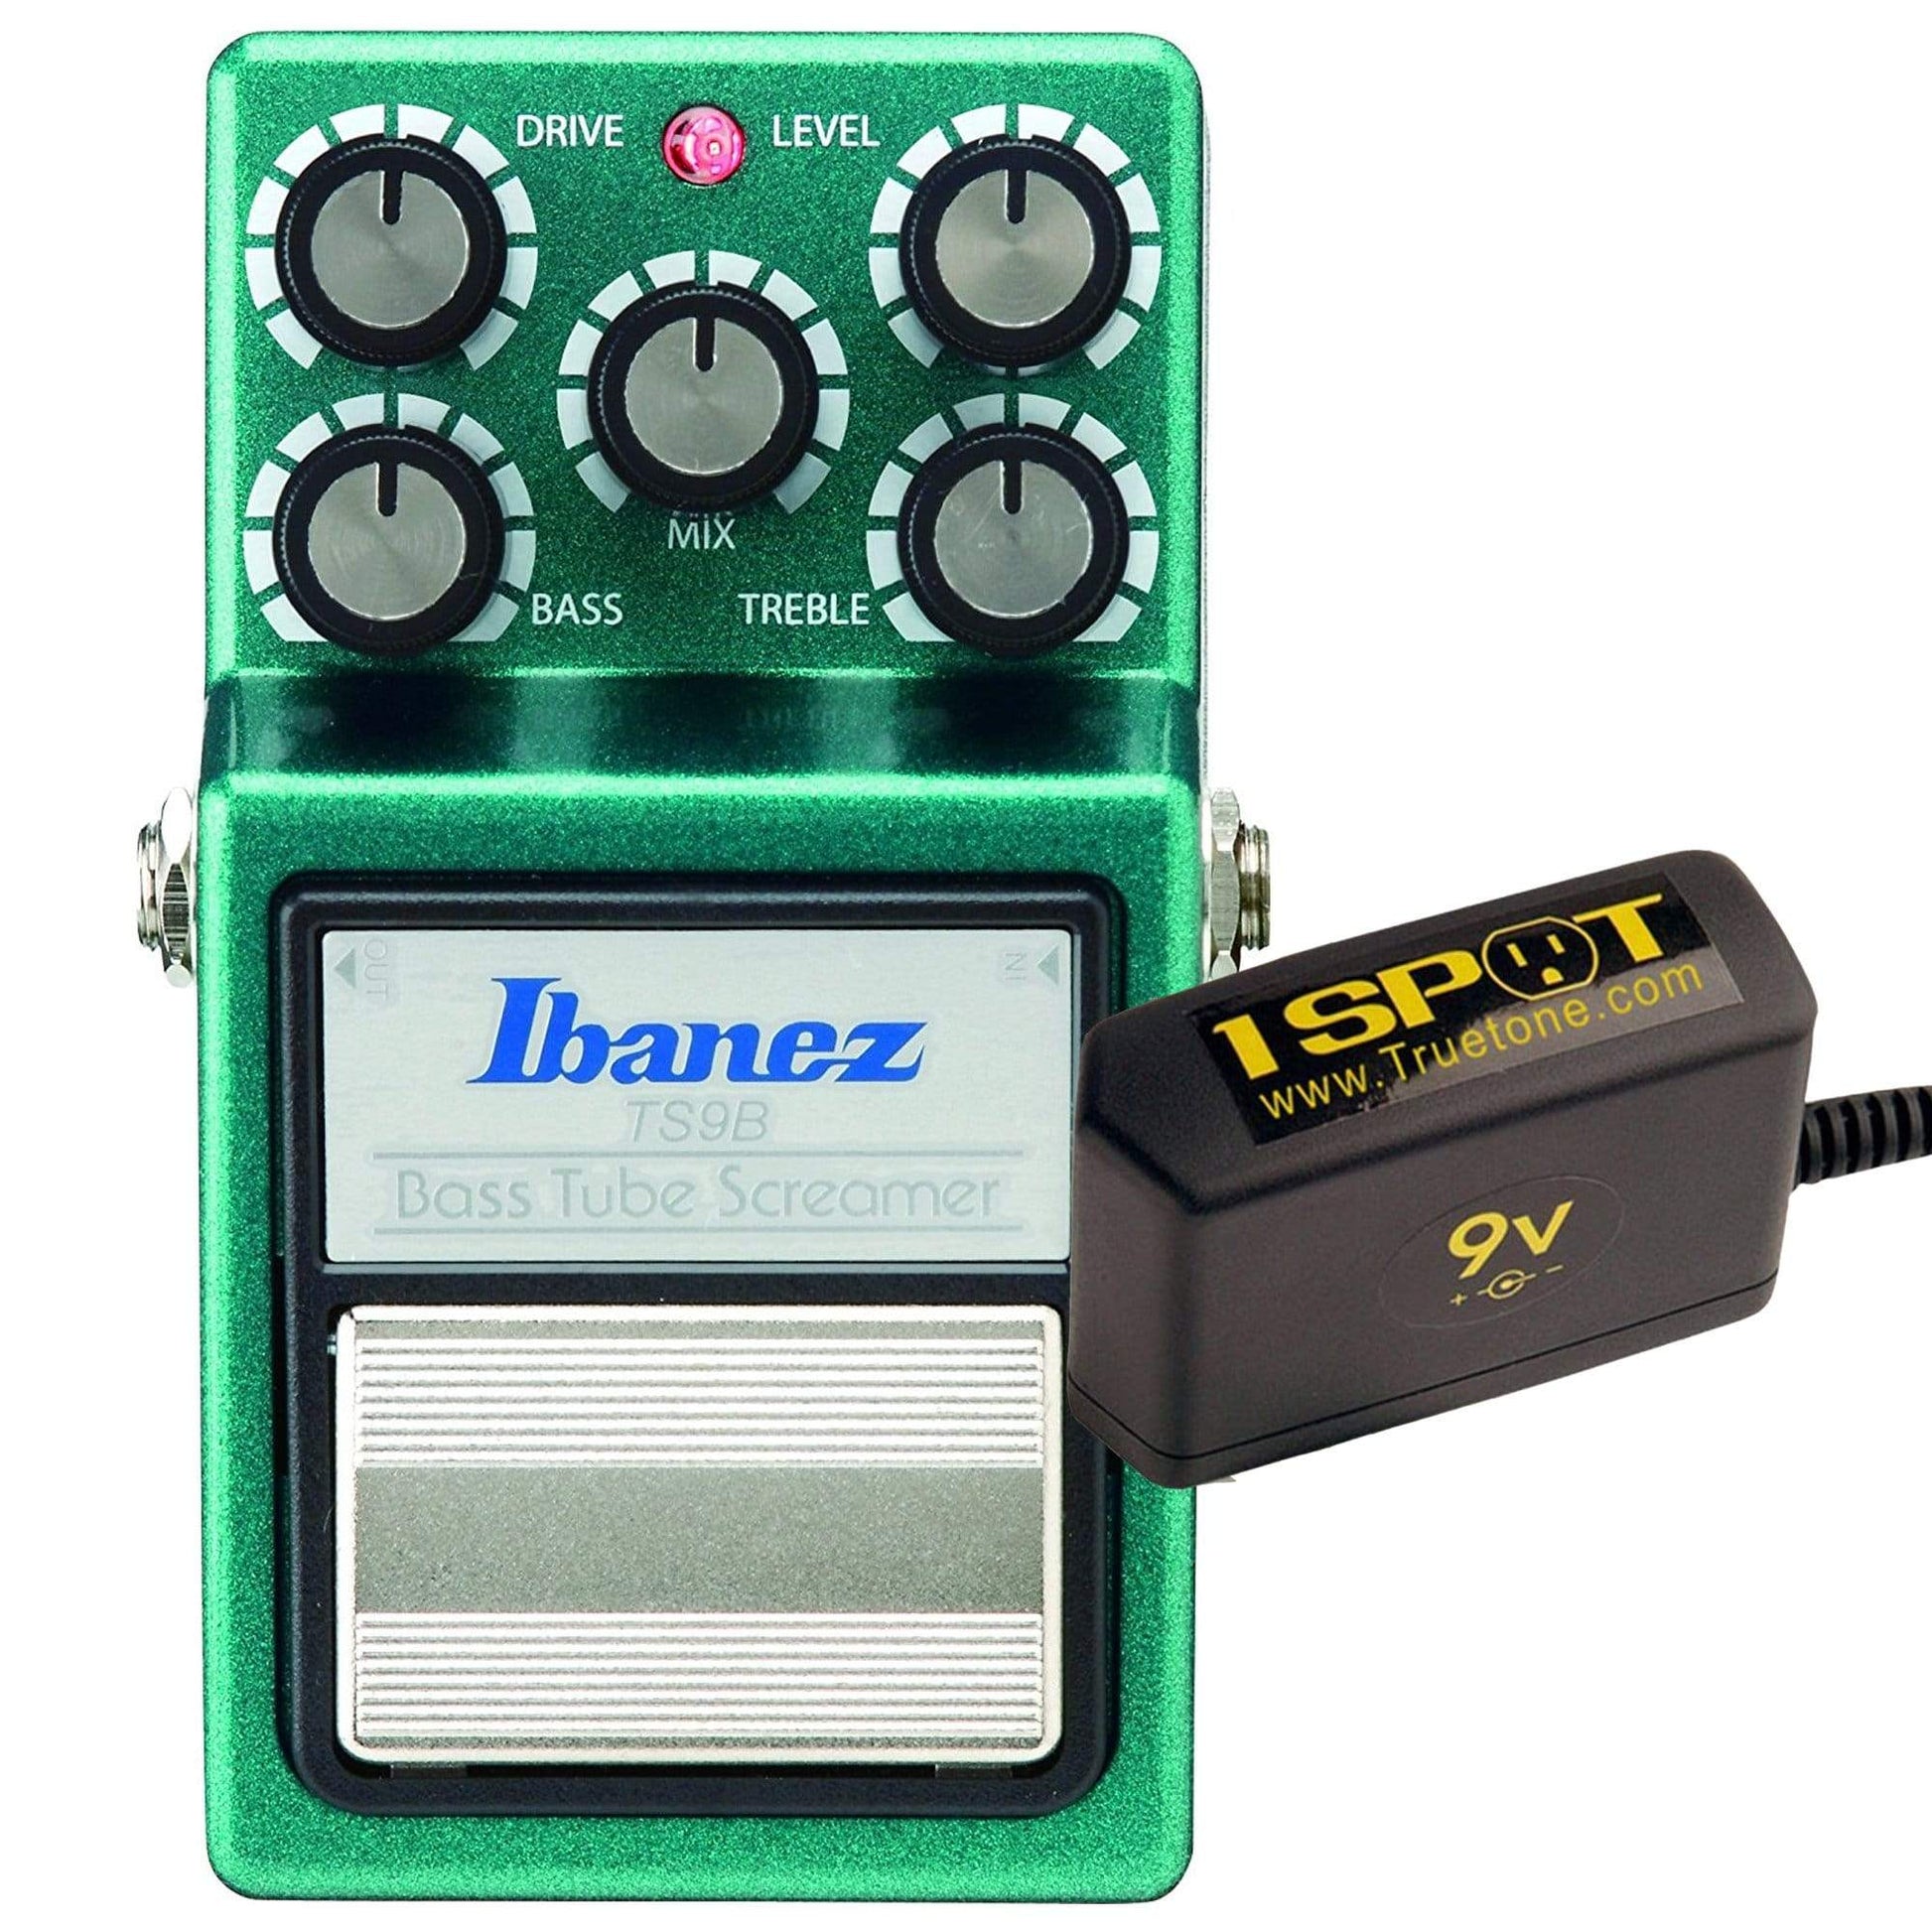 Ibanez TS9B Bass Tube Screamer Overdrive Bundle w/ Truetone 1 Spot Space Saving 9v Adapter Effects and Pedals / Overdrive and Boost